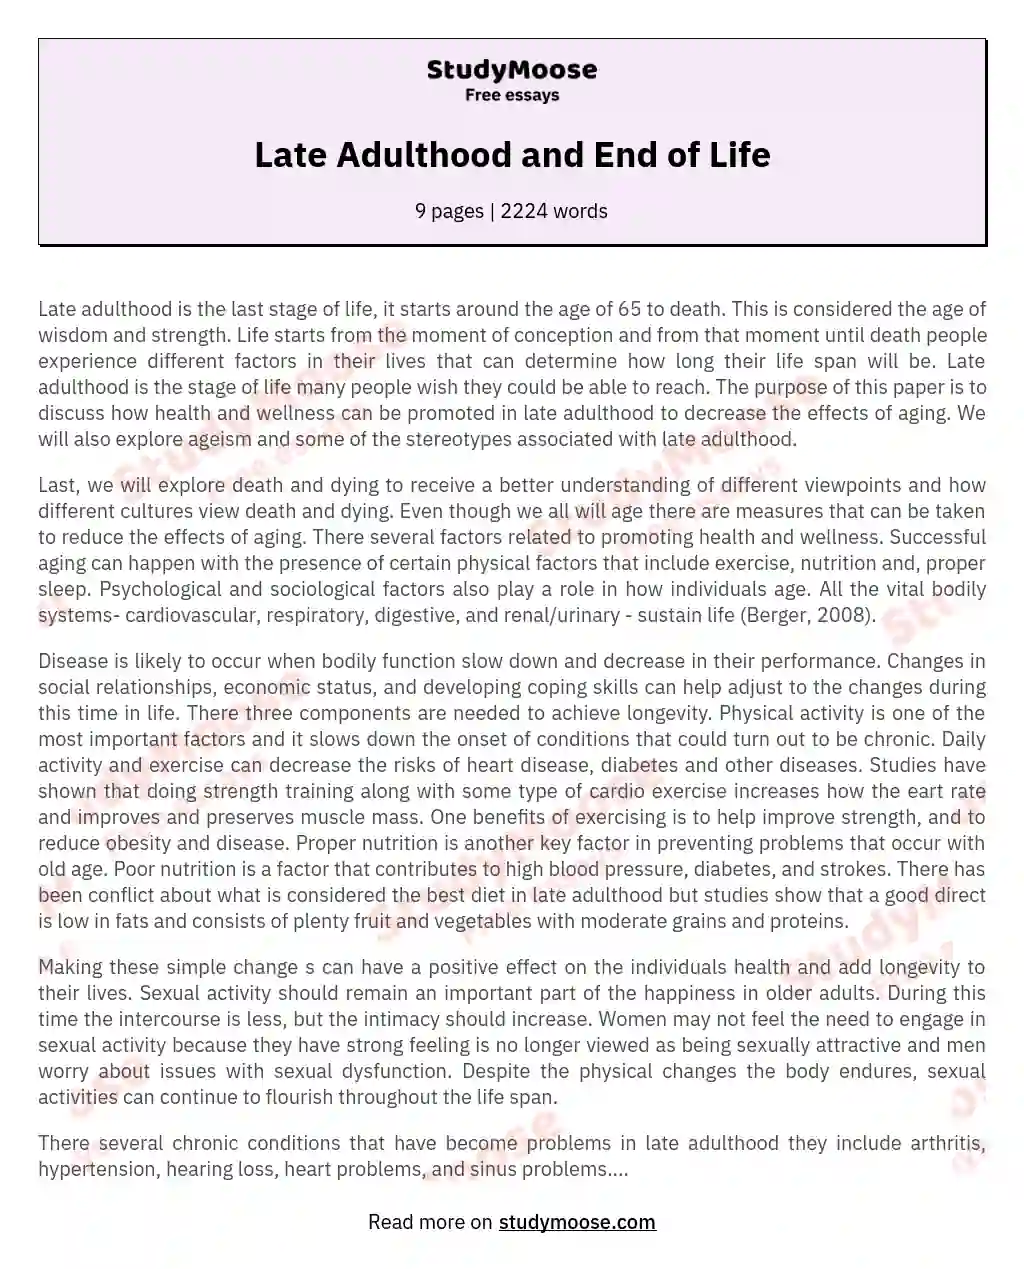 Late Adulthood and End of Life essay